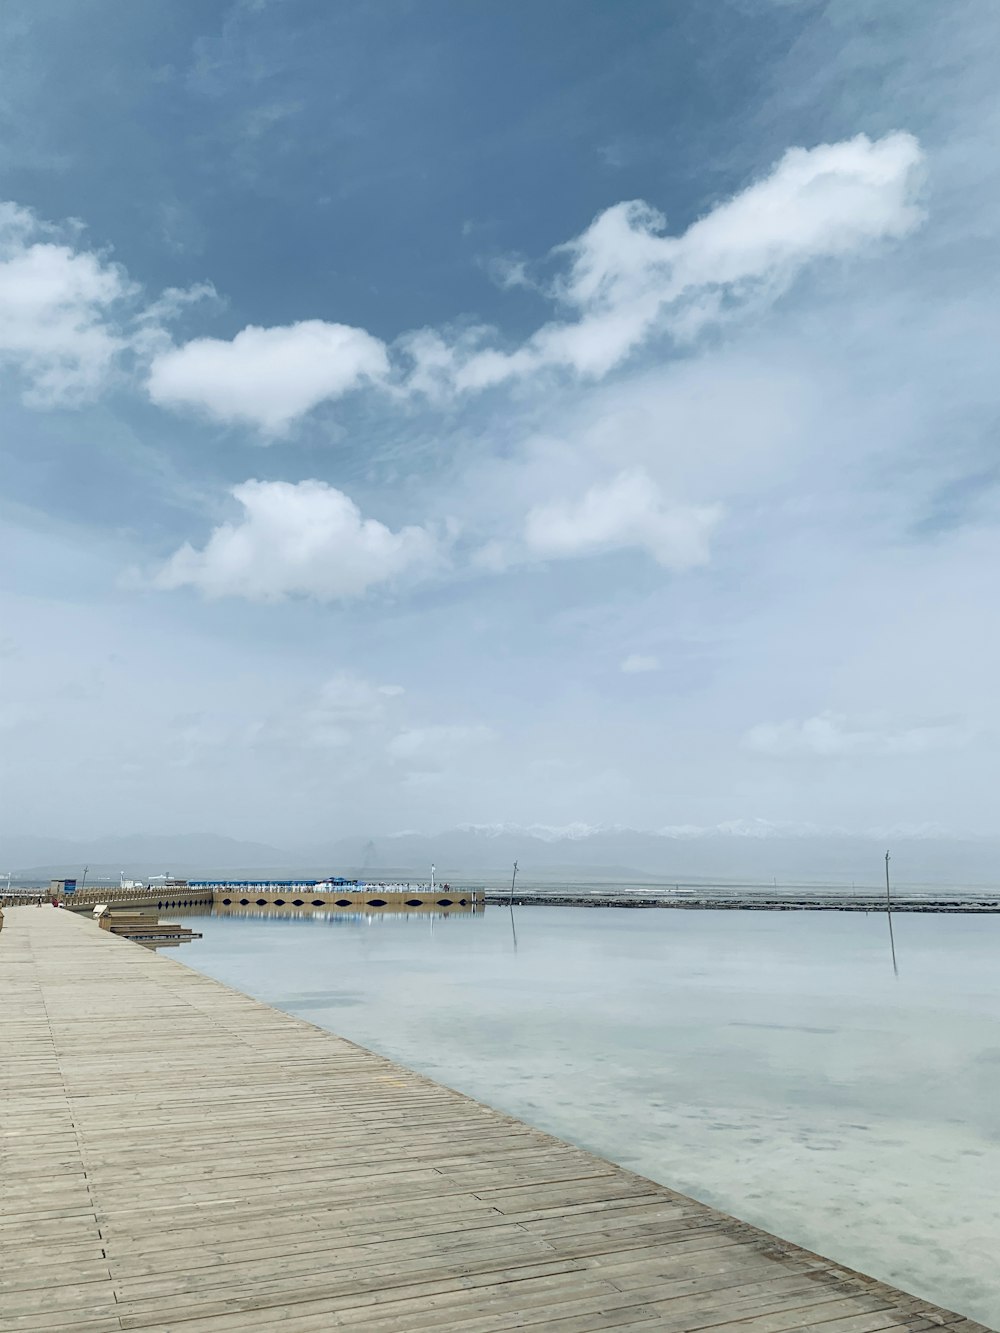 brown wooden dock on sea under blue sky and white clouds during daytime